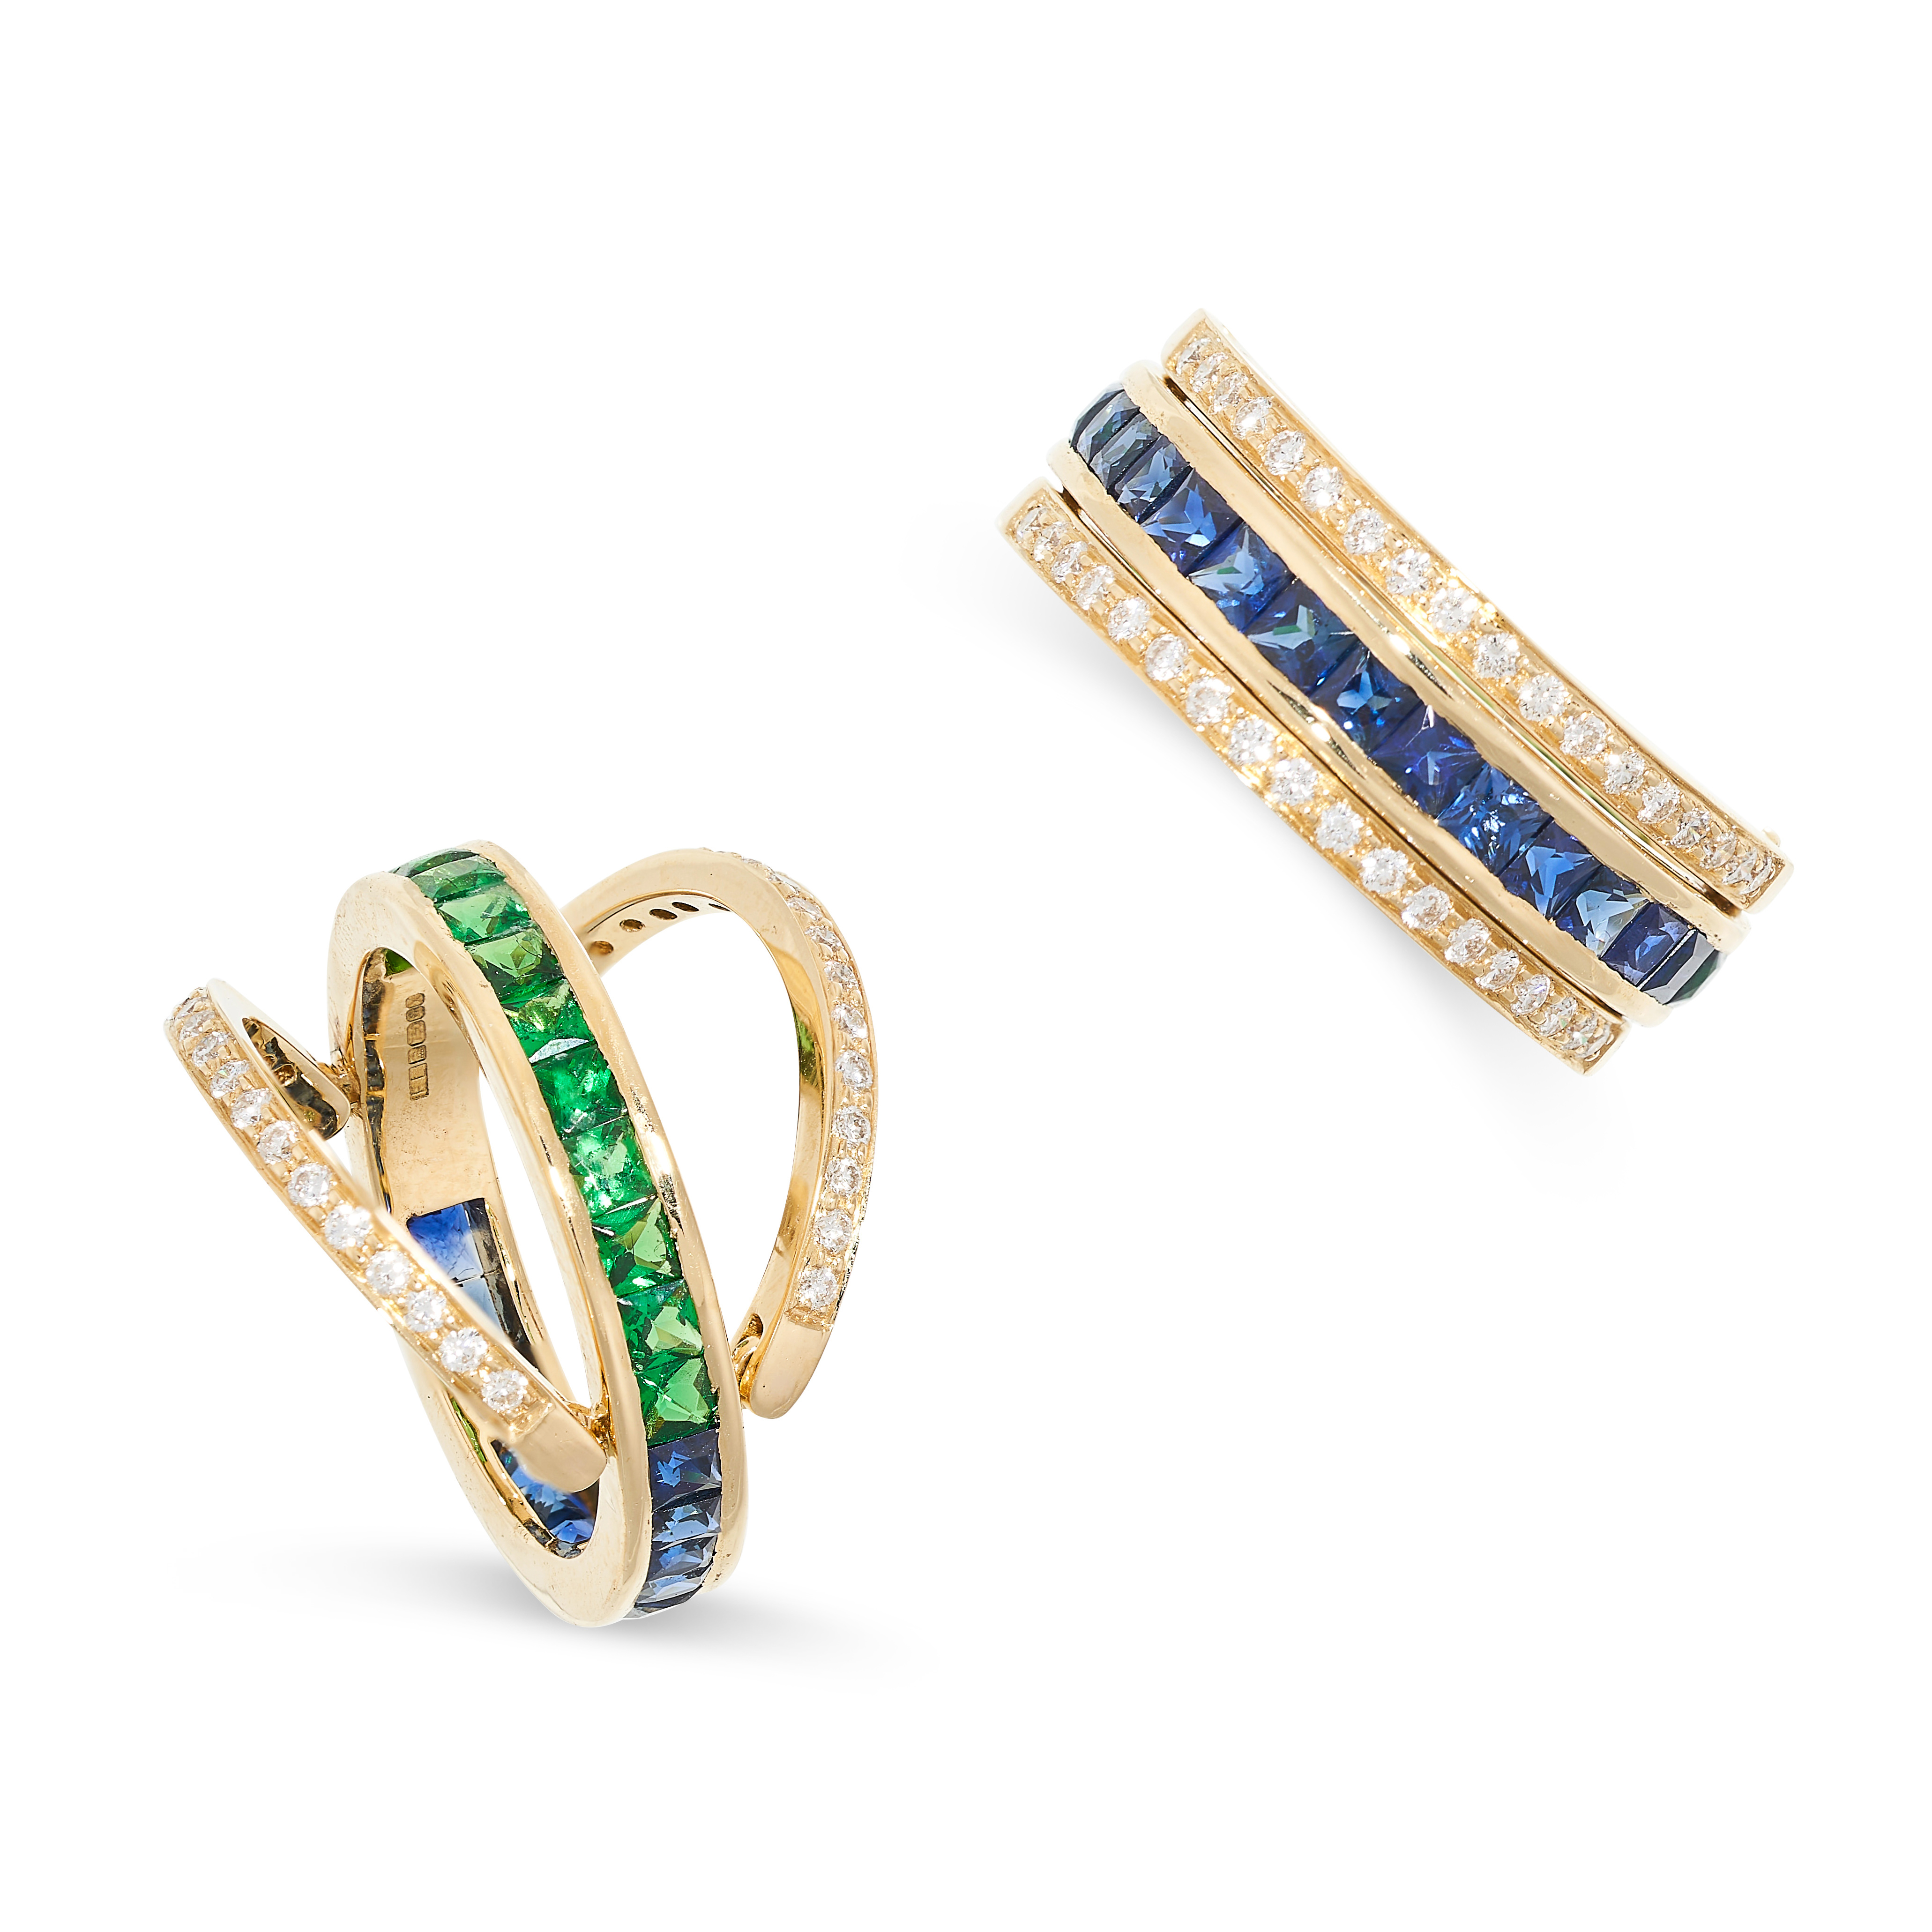 A SAPPHIRE AND TSAVORITE GARNET REVERSIBLE RING in 18ct yellow gold, the central band half set